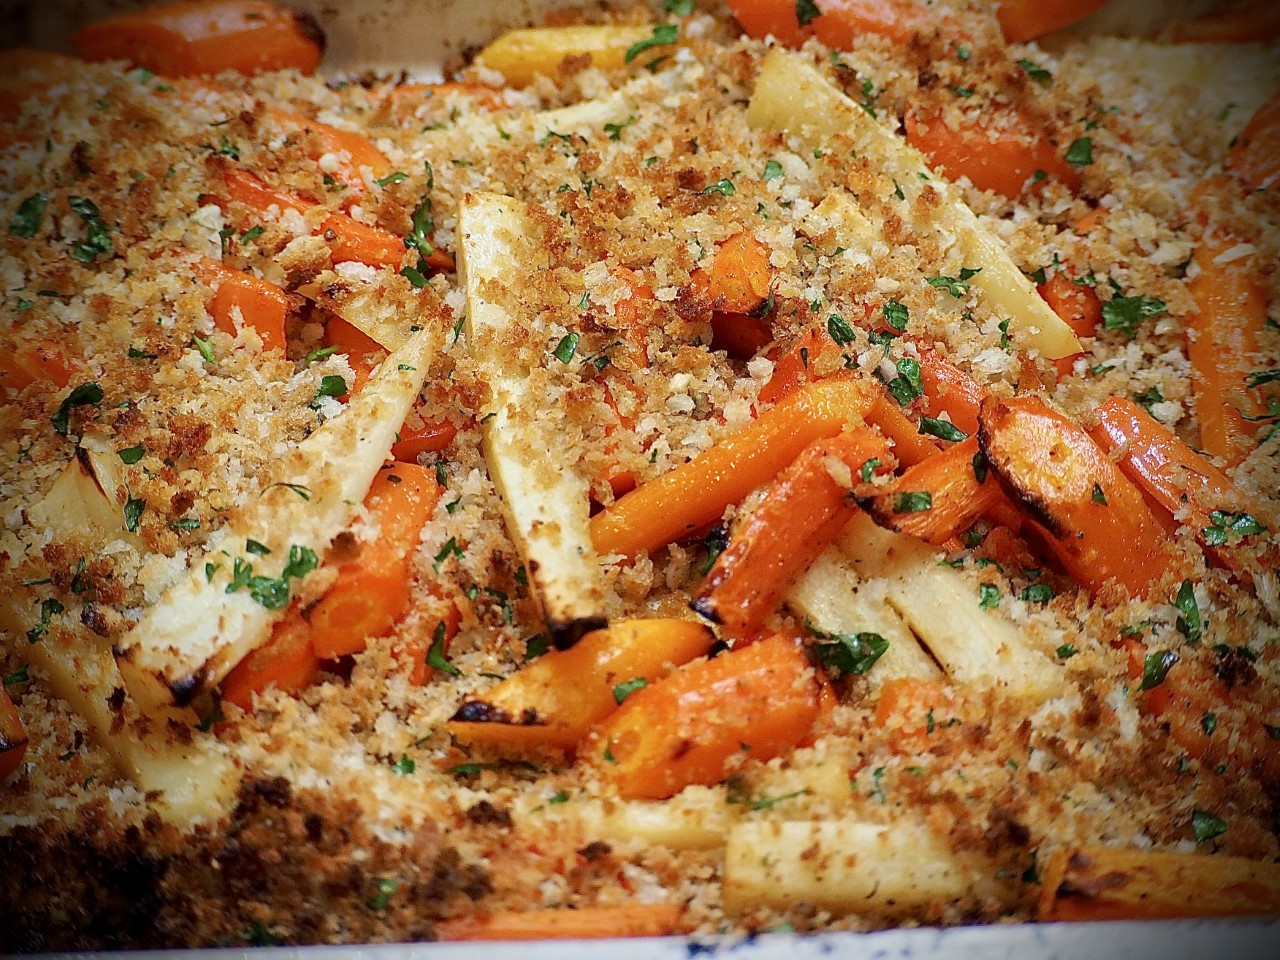 Roasted Carrots and Parsnips with Garlic Bread Crumb Topping